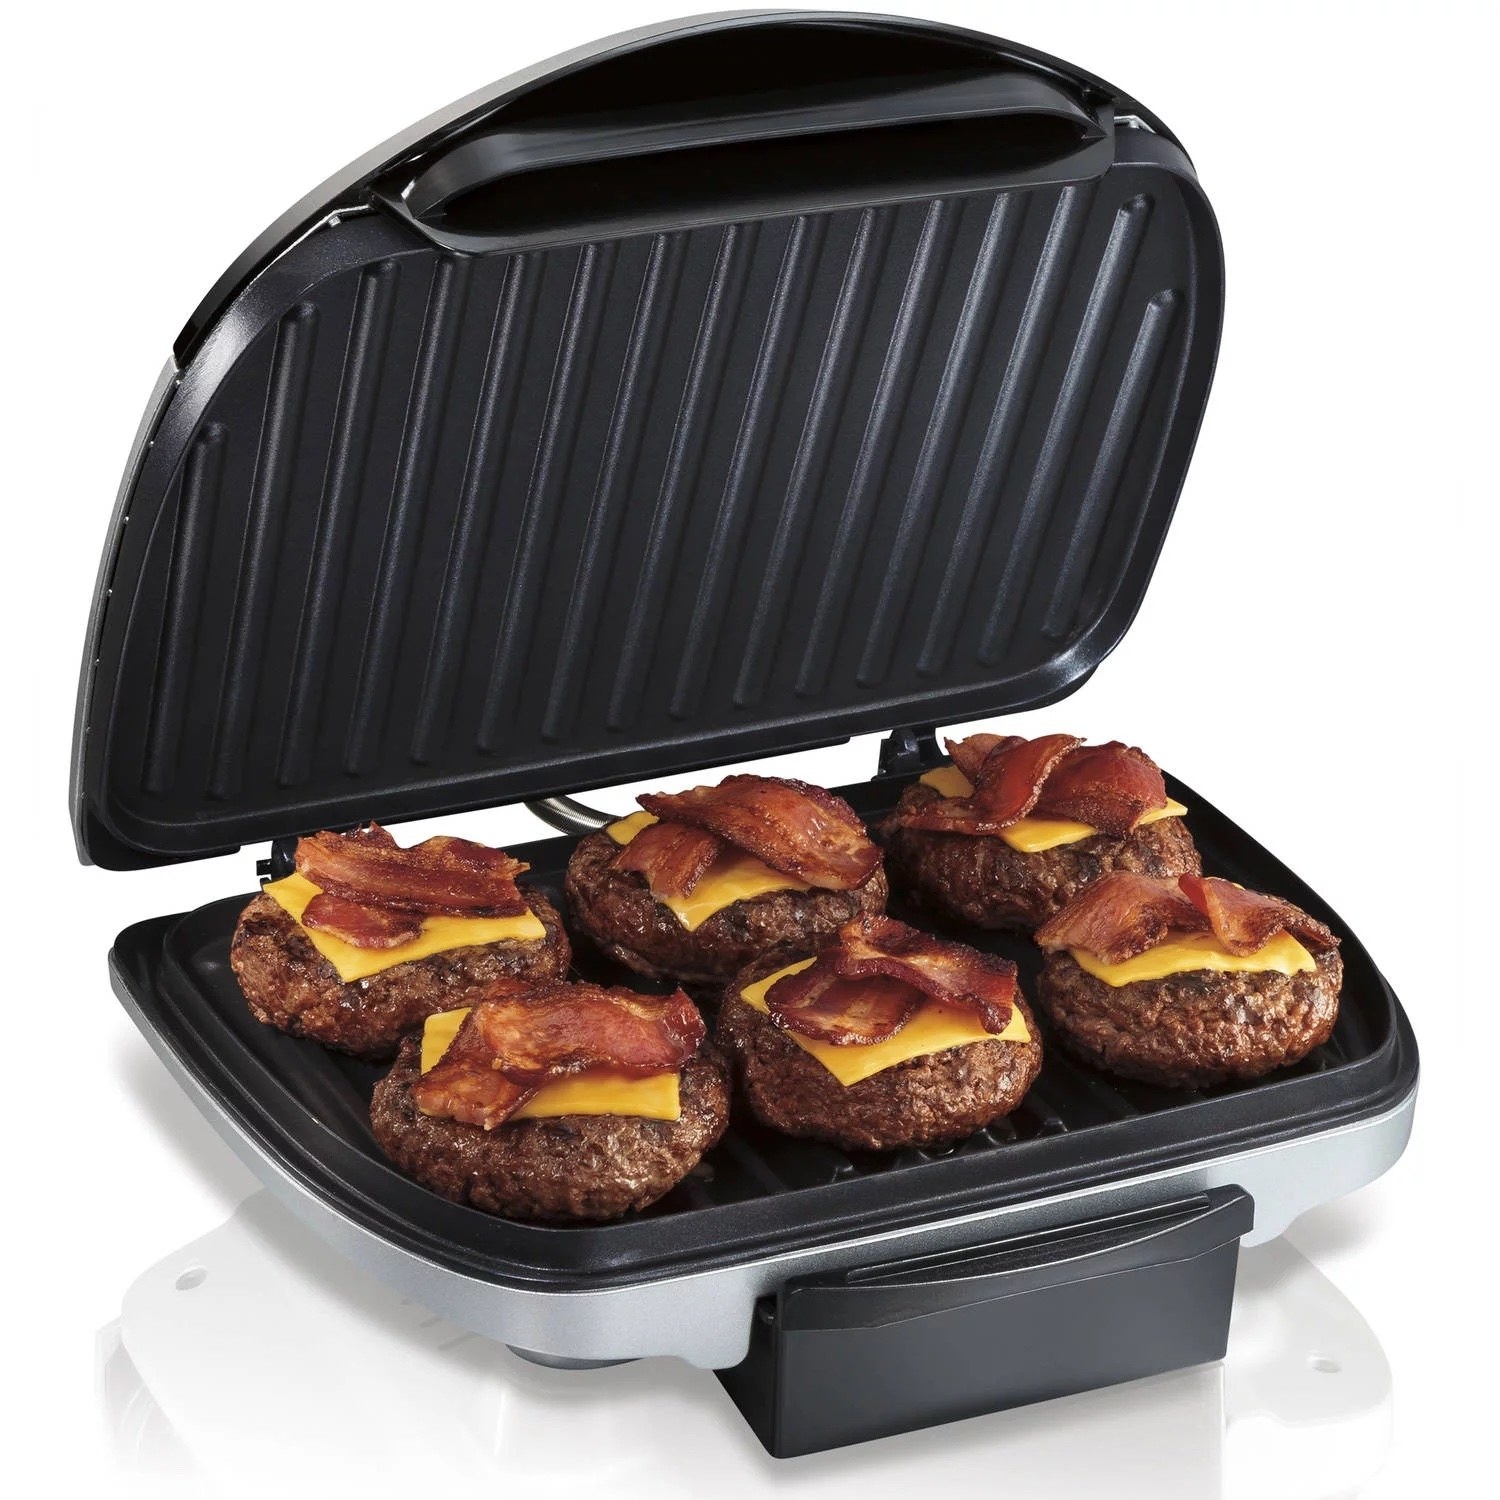 the black indoor grill with bacon cheeseburgers